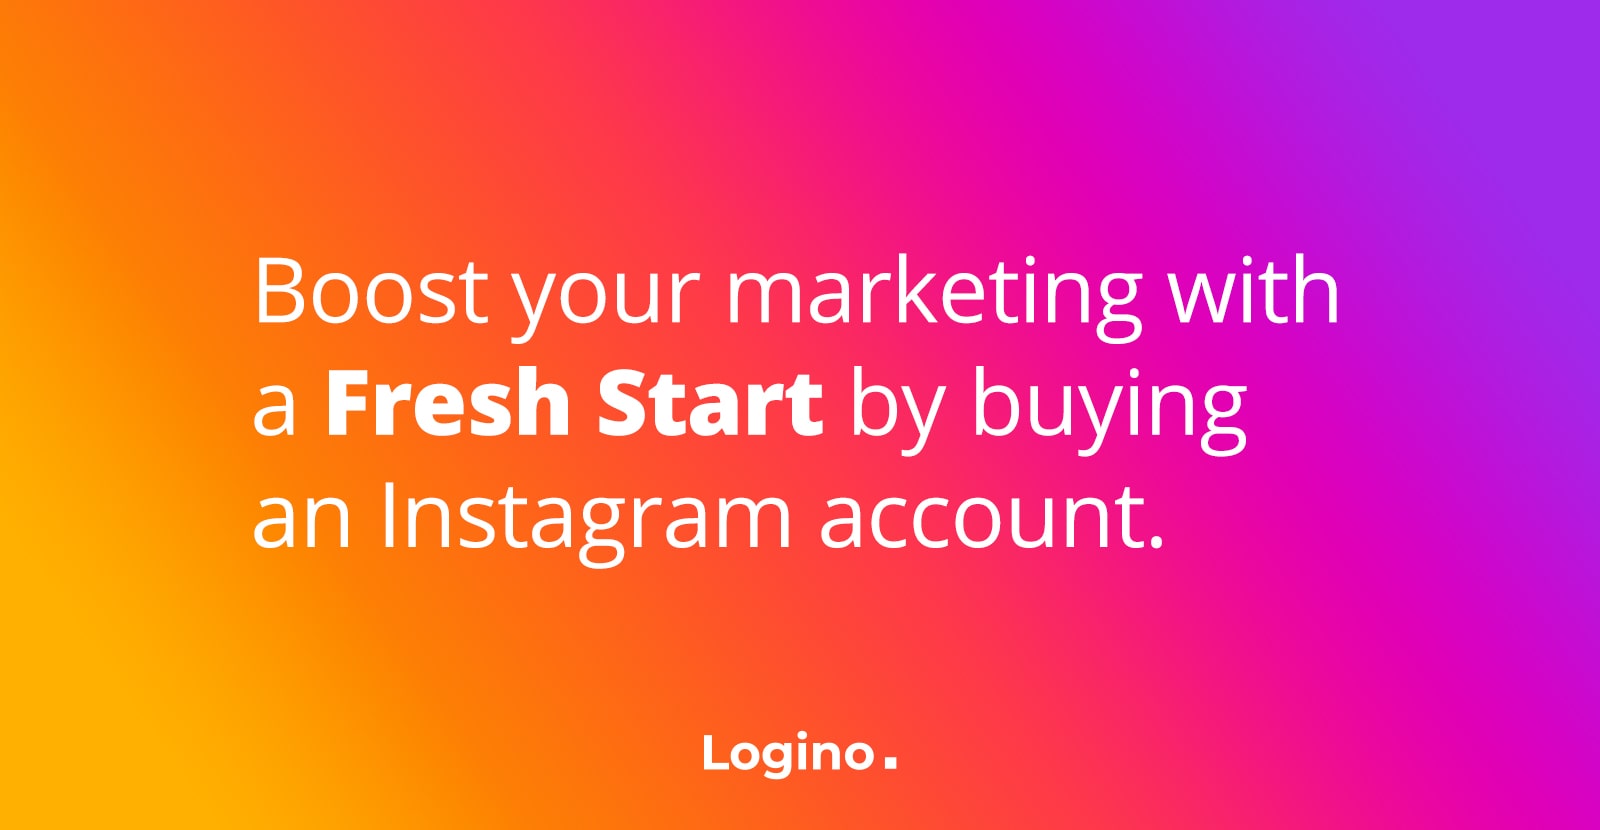 Best place to buy Instagram accounts